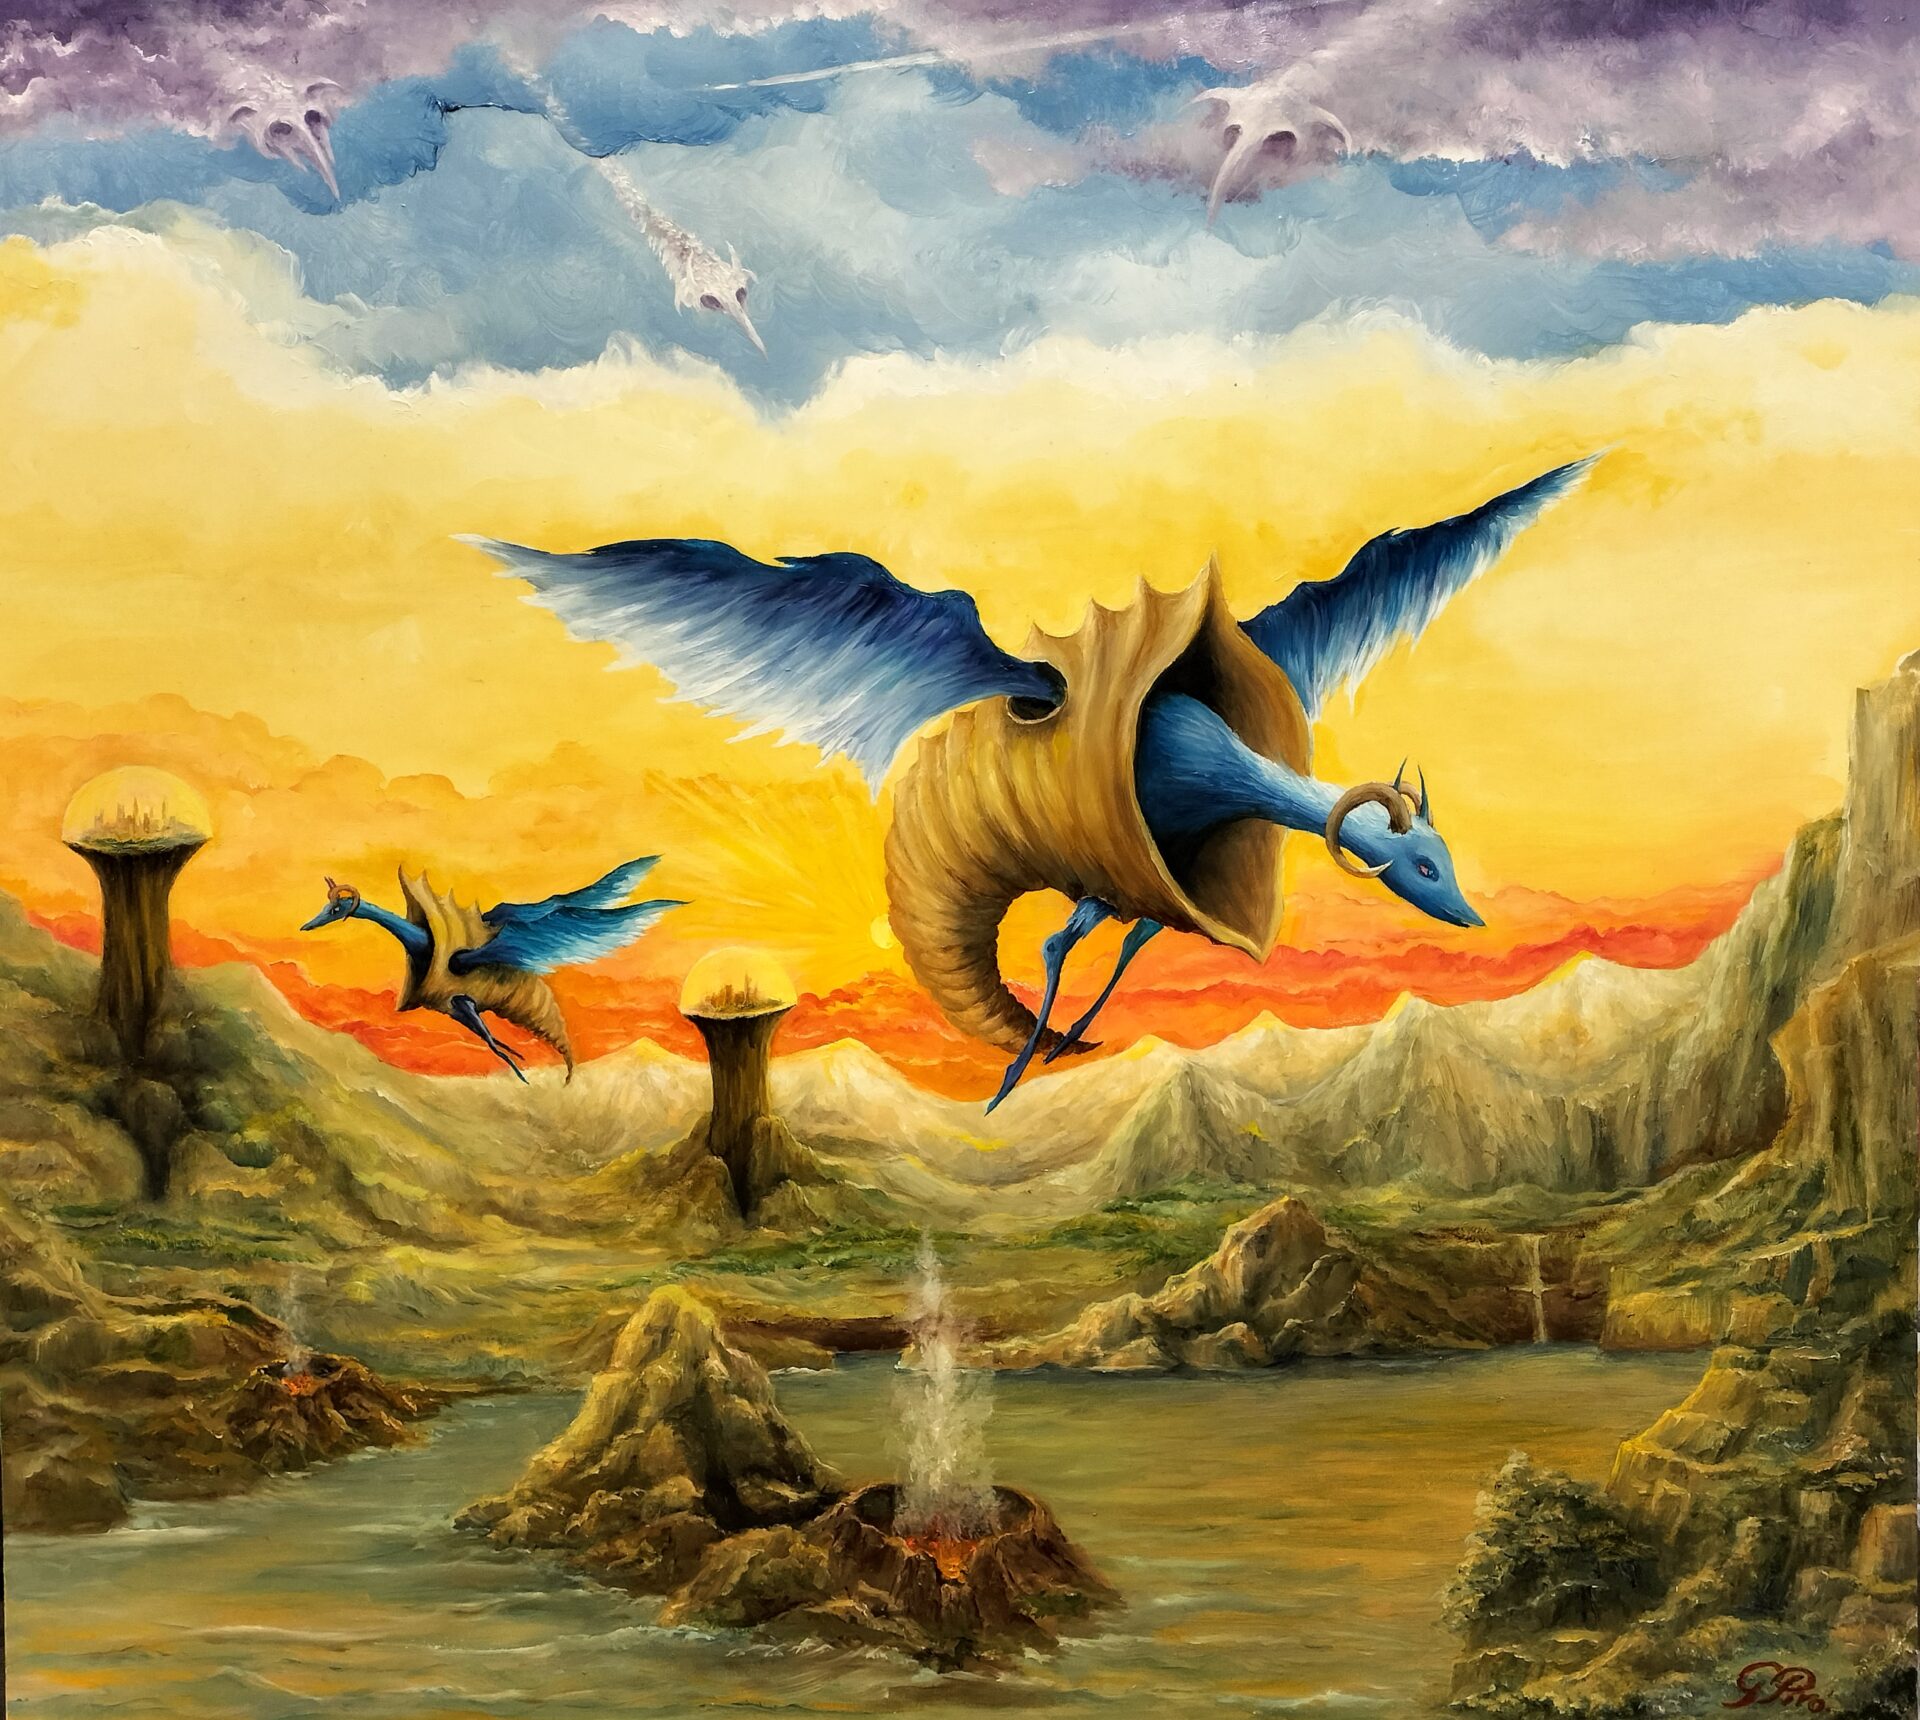 gregory pyra piro, oil painting, fantasy surrealism, planet, solar system, flying dragons, dragons with horns, shell, vests, ghosts, demons, clouds, lake, islands, erupting volcanoes, green vegetation, burshes, trees, waterfall, dome, cities